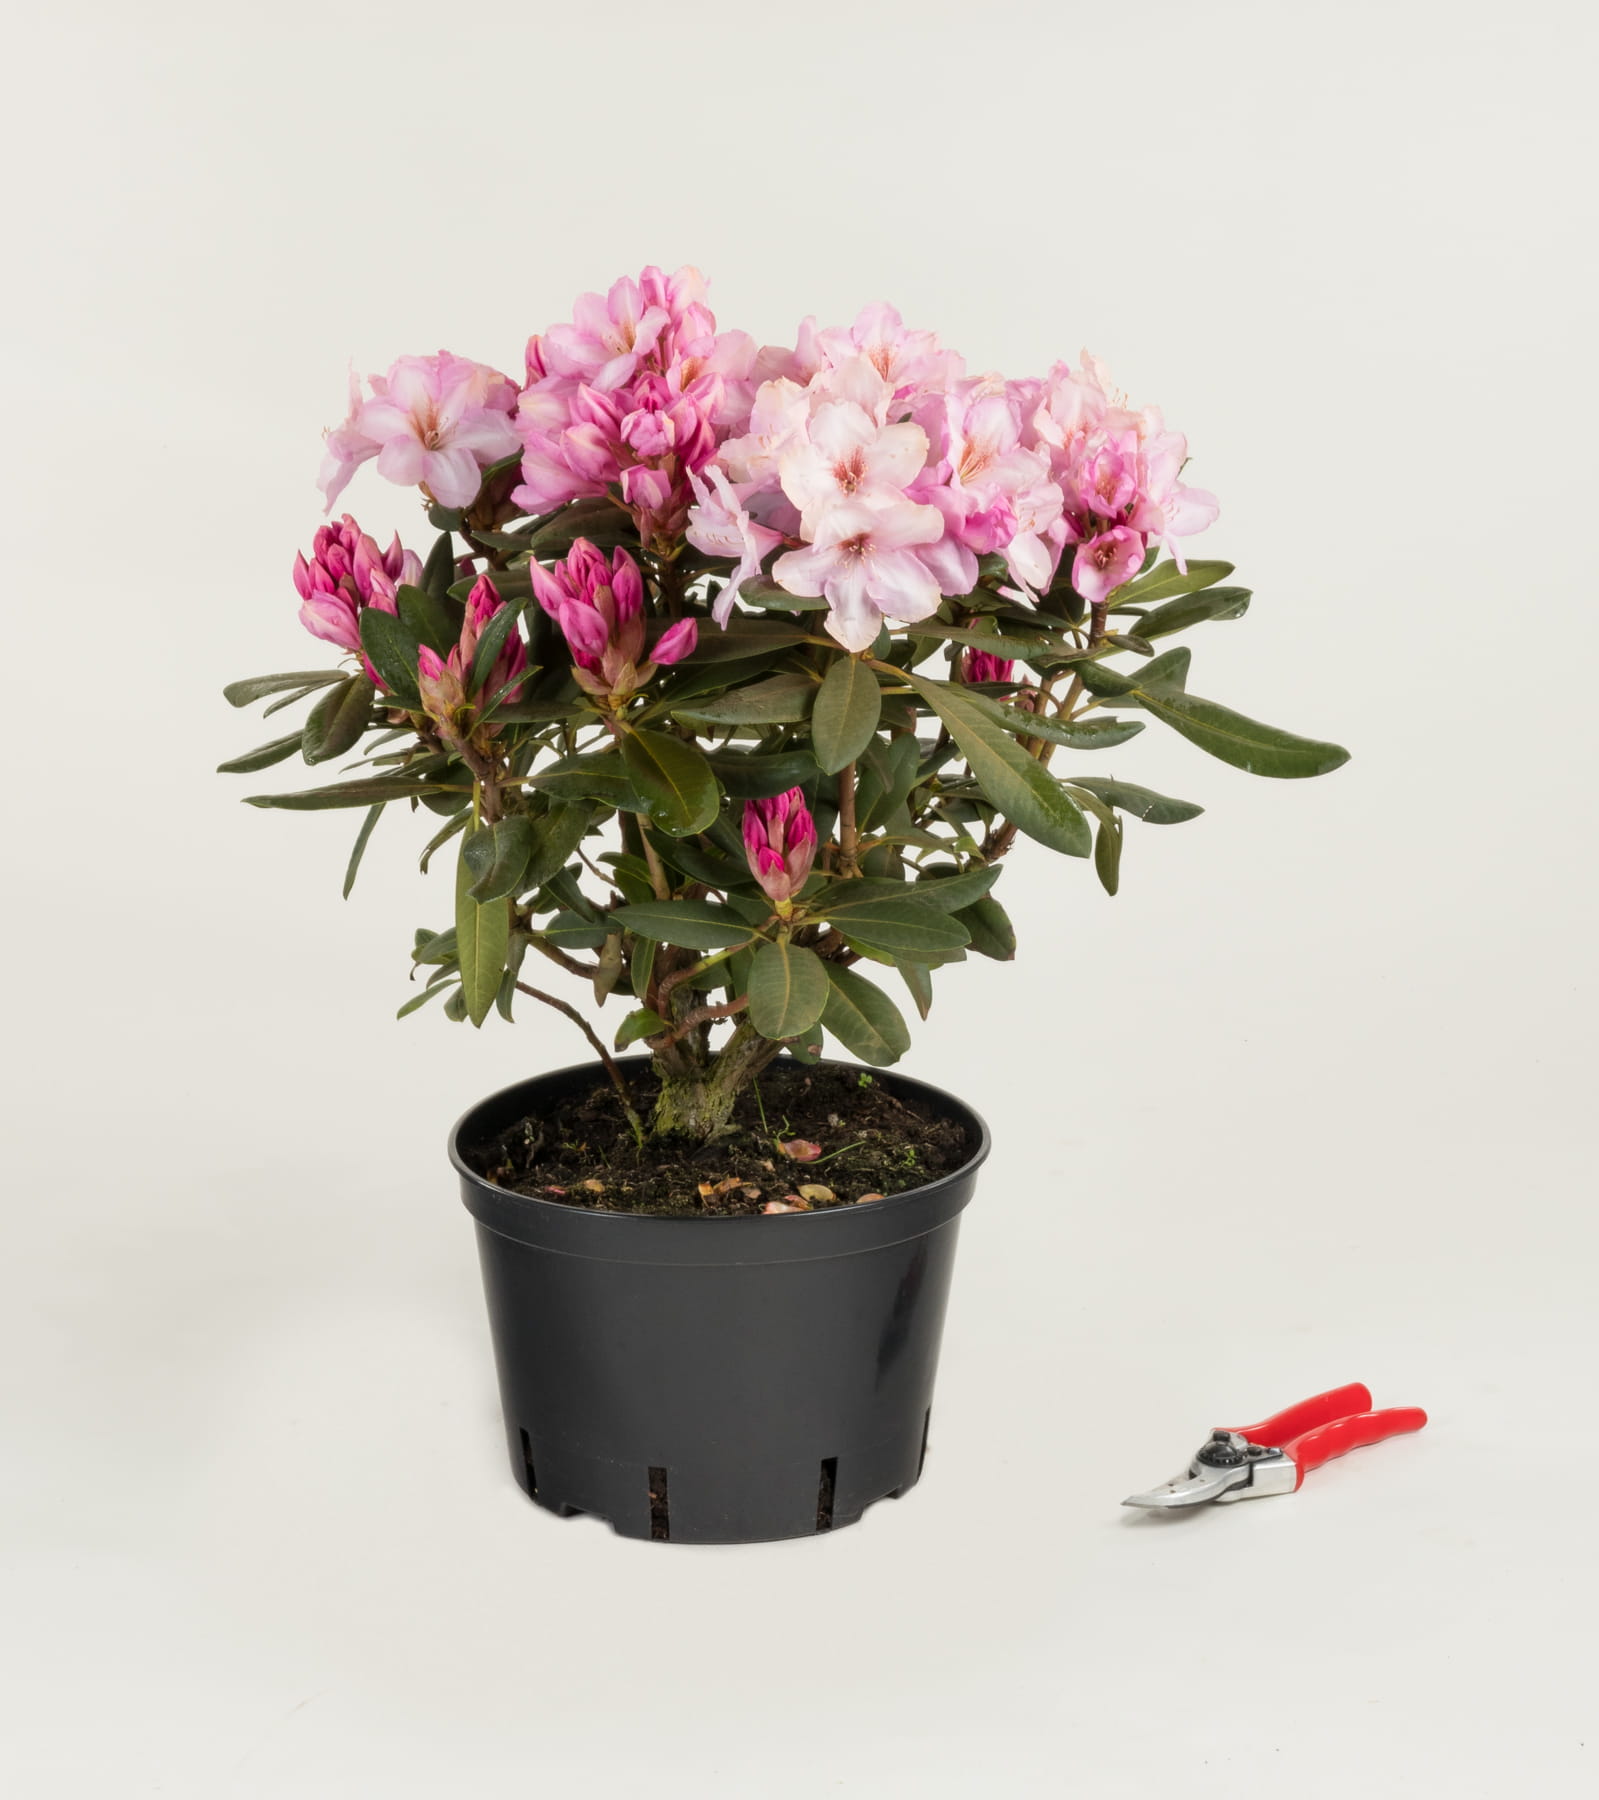 Rhododendron 'Paola' • Rhododendron Hybride 'Paola' Containerware 30-40 cm Ansicht 1